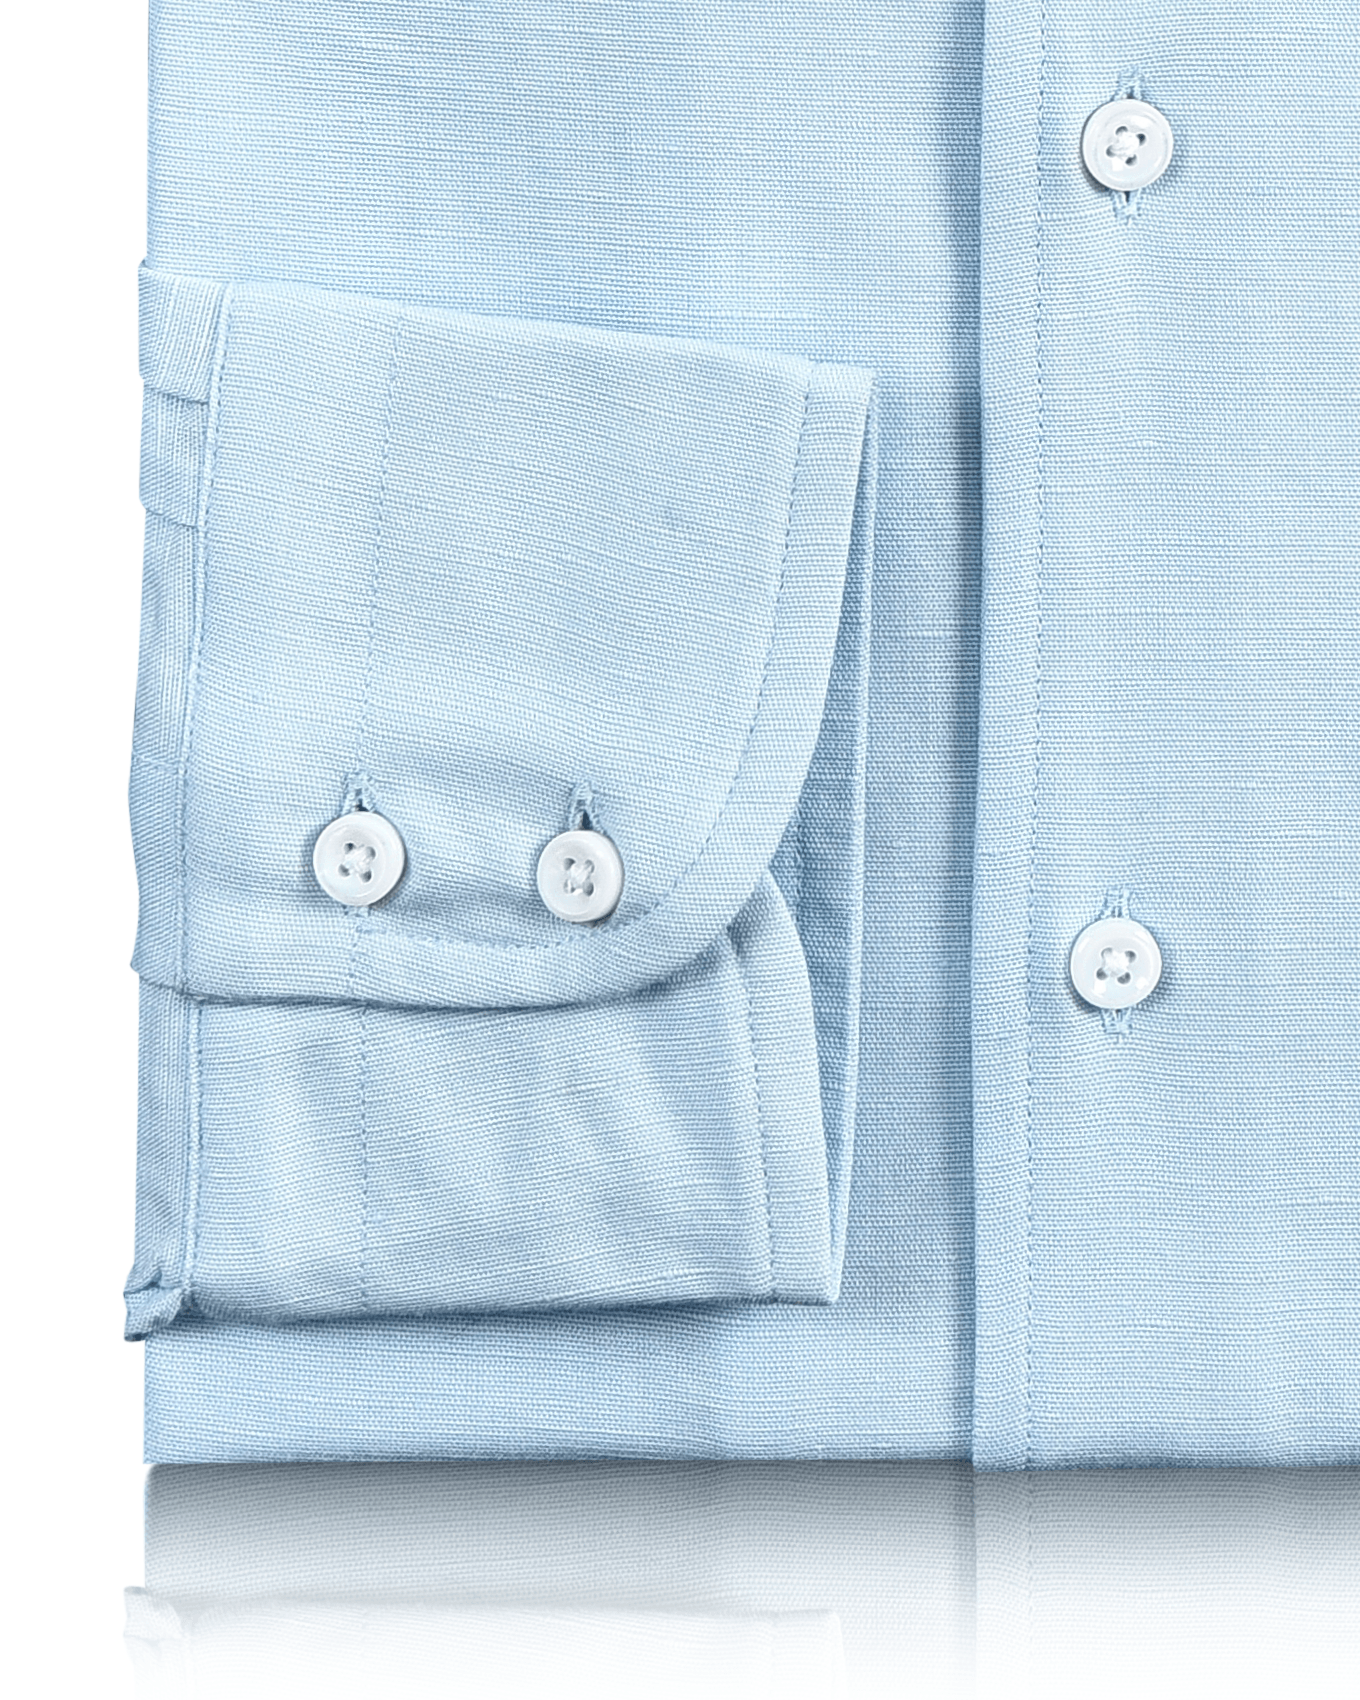 Cuff of custom linen shirt for men in powder blue by Luxire Clothing